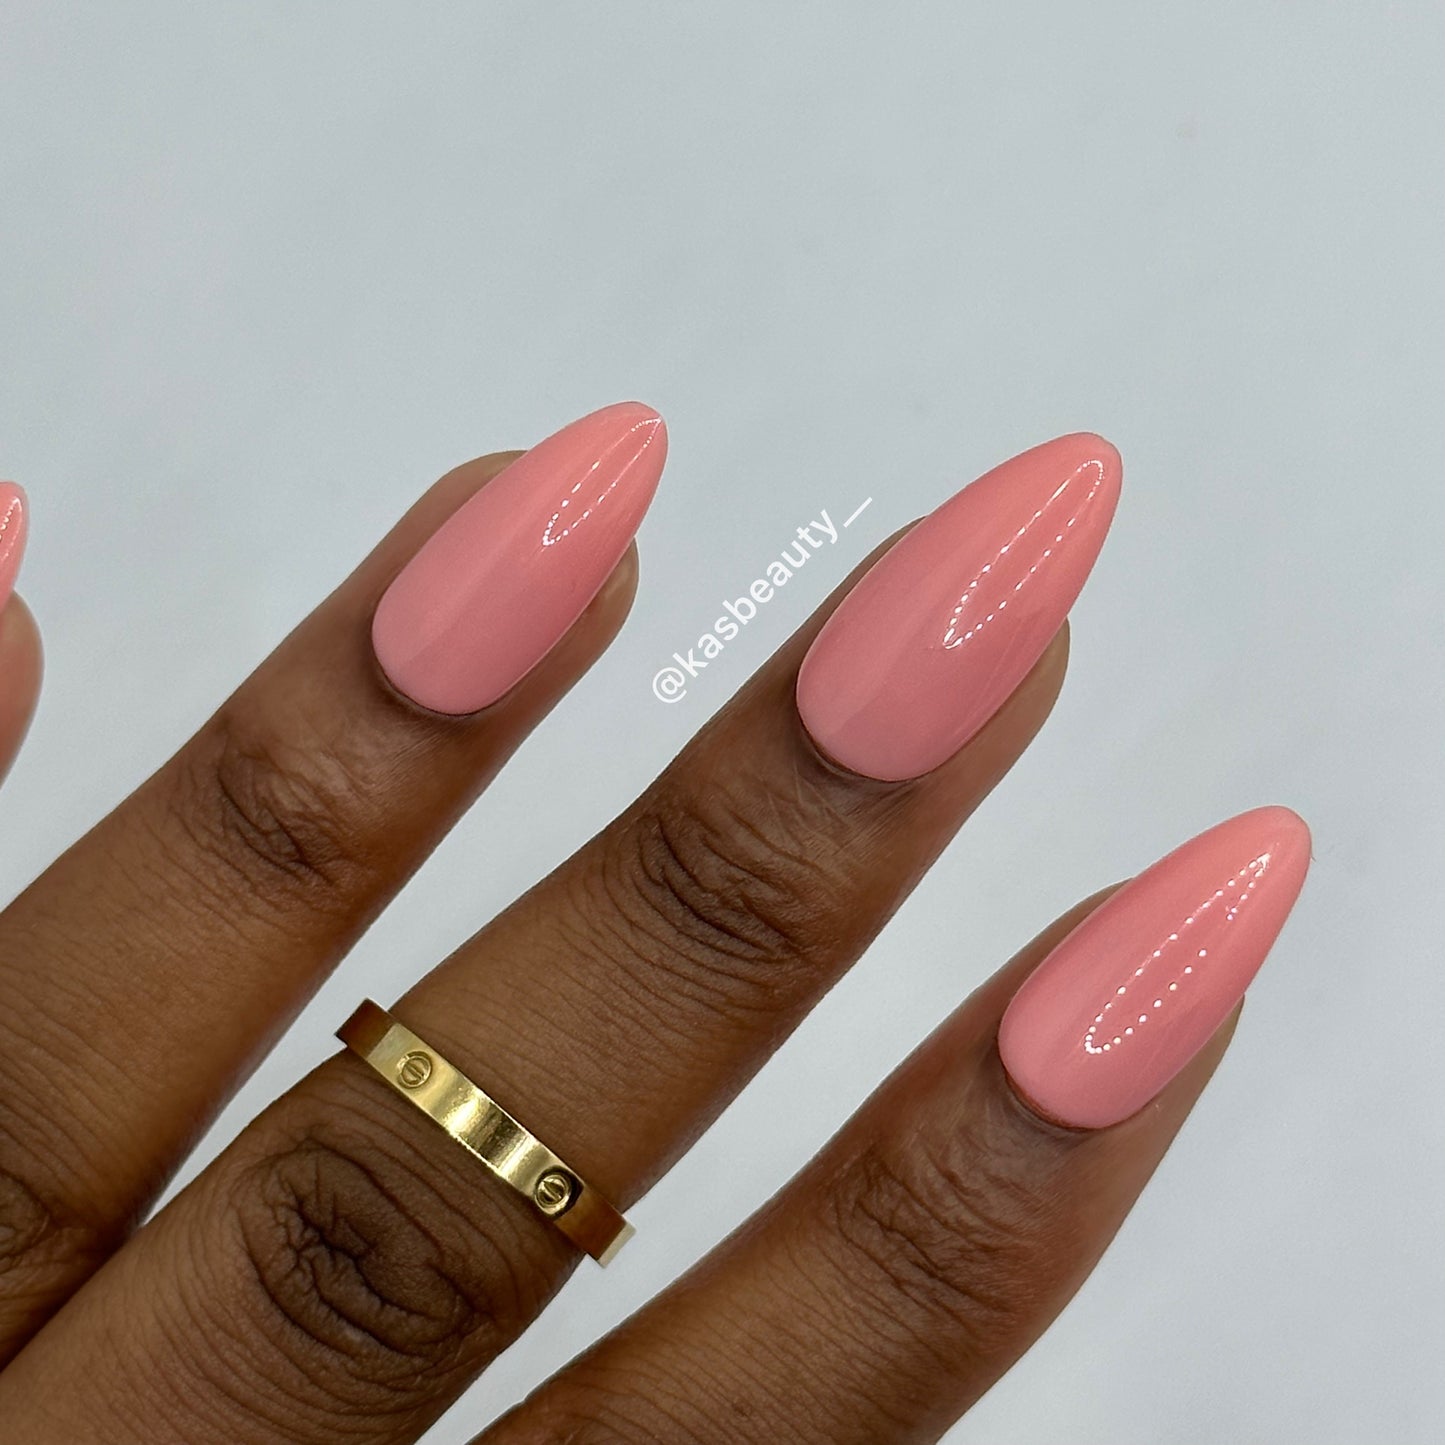 Opaque Pink Press On Nail Set